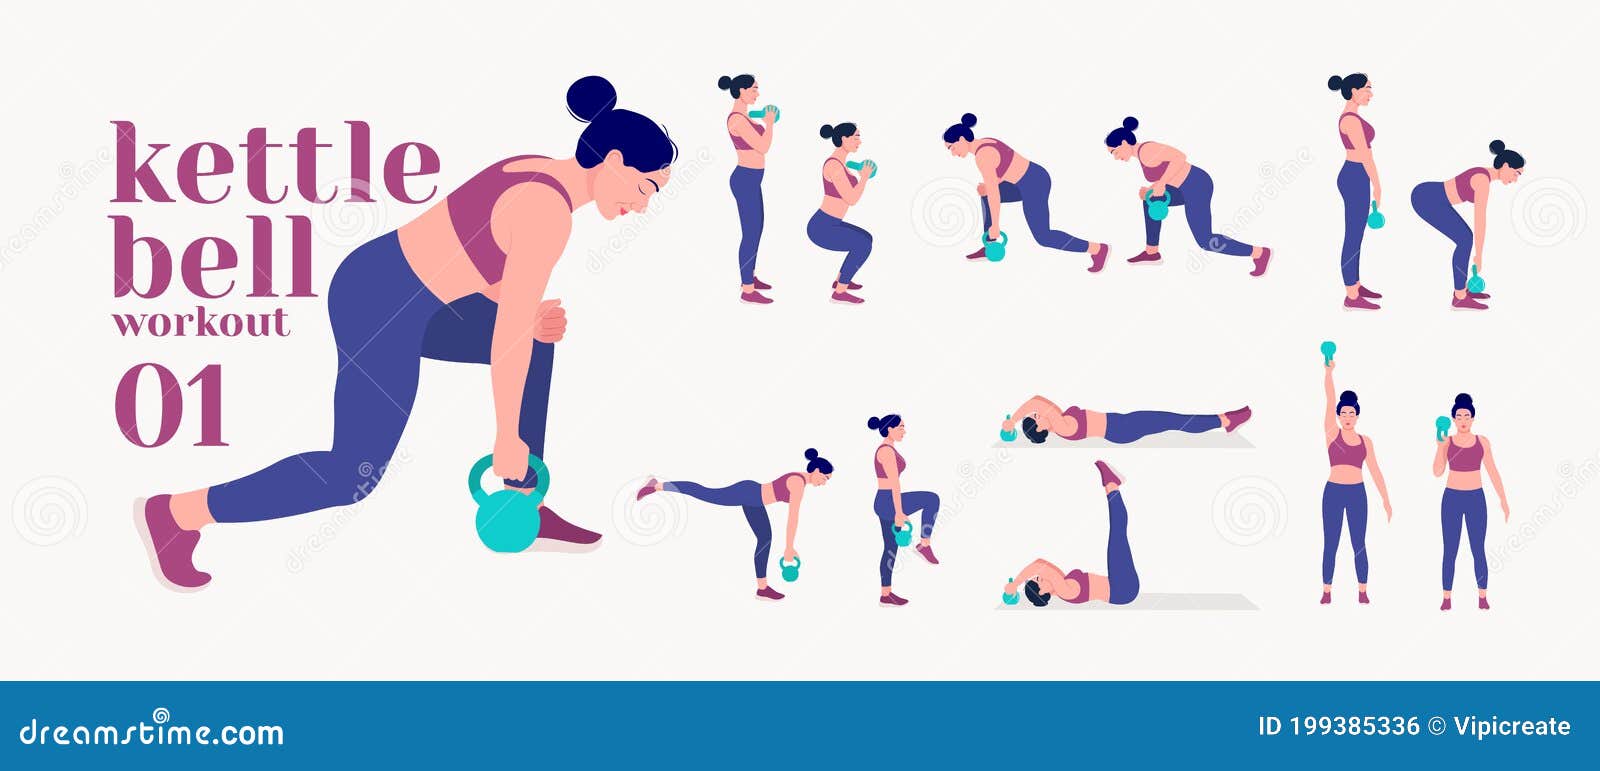 Kettlebell Workout. Women Exercise Vector Set. Women Doing Fitness and Yoga Exercises Stock Vector Illustration of athlete, people: 199385336